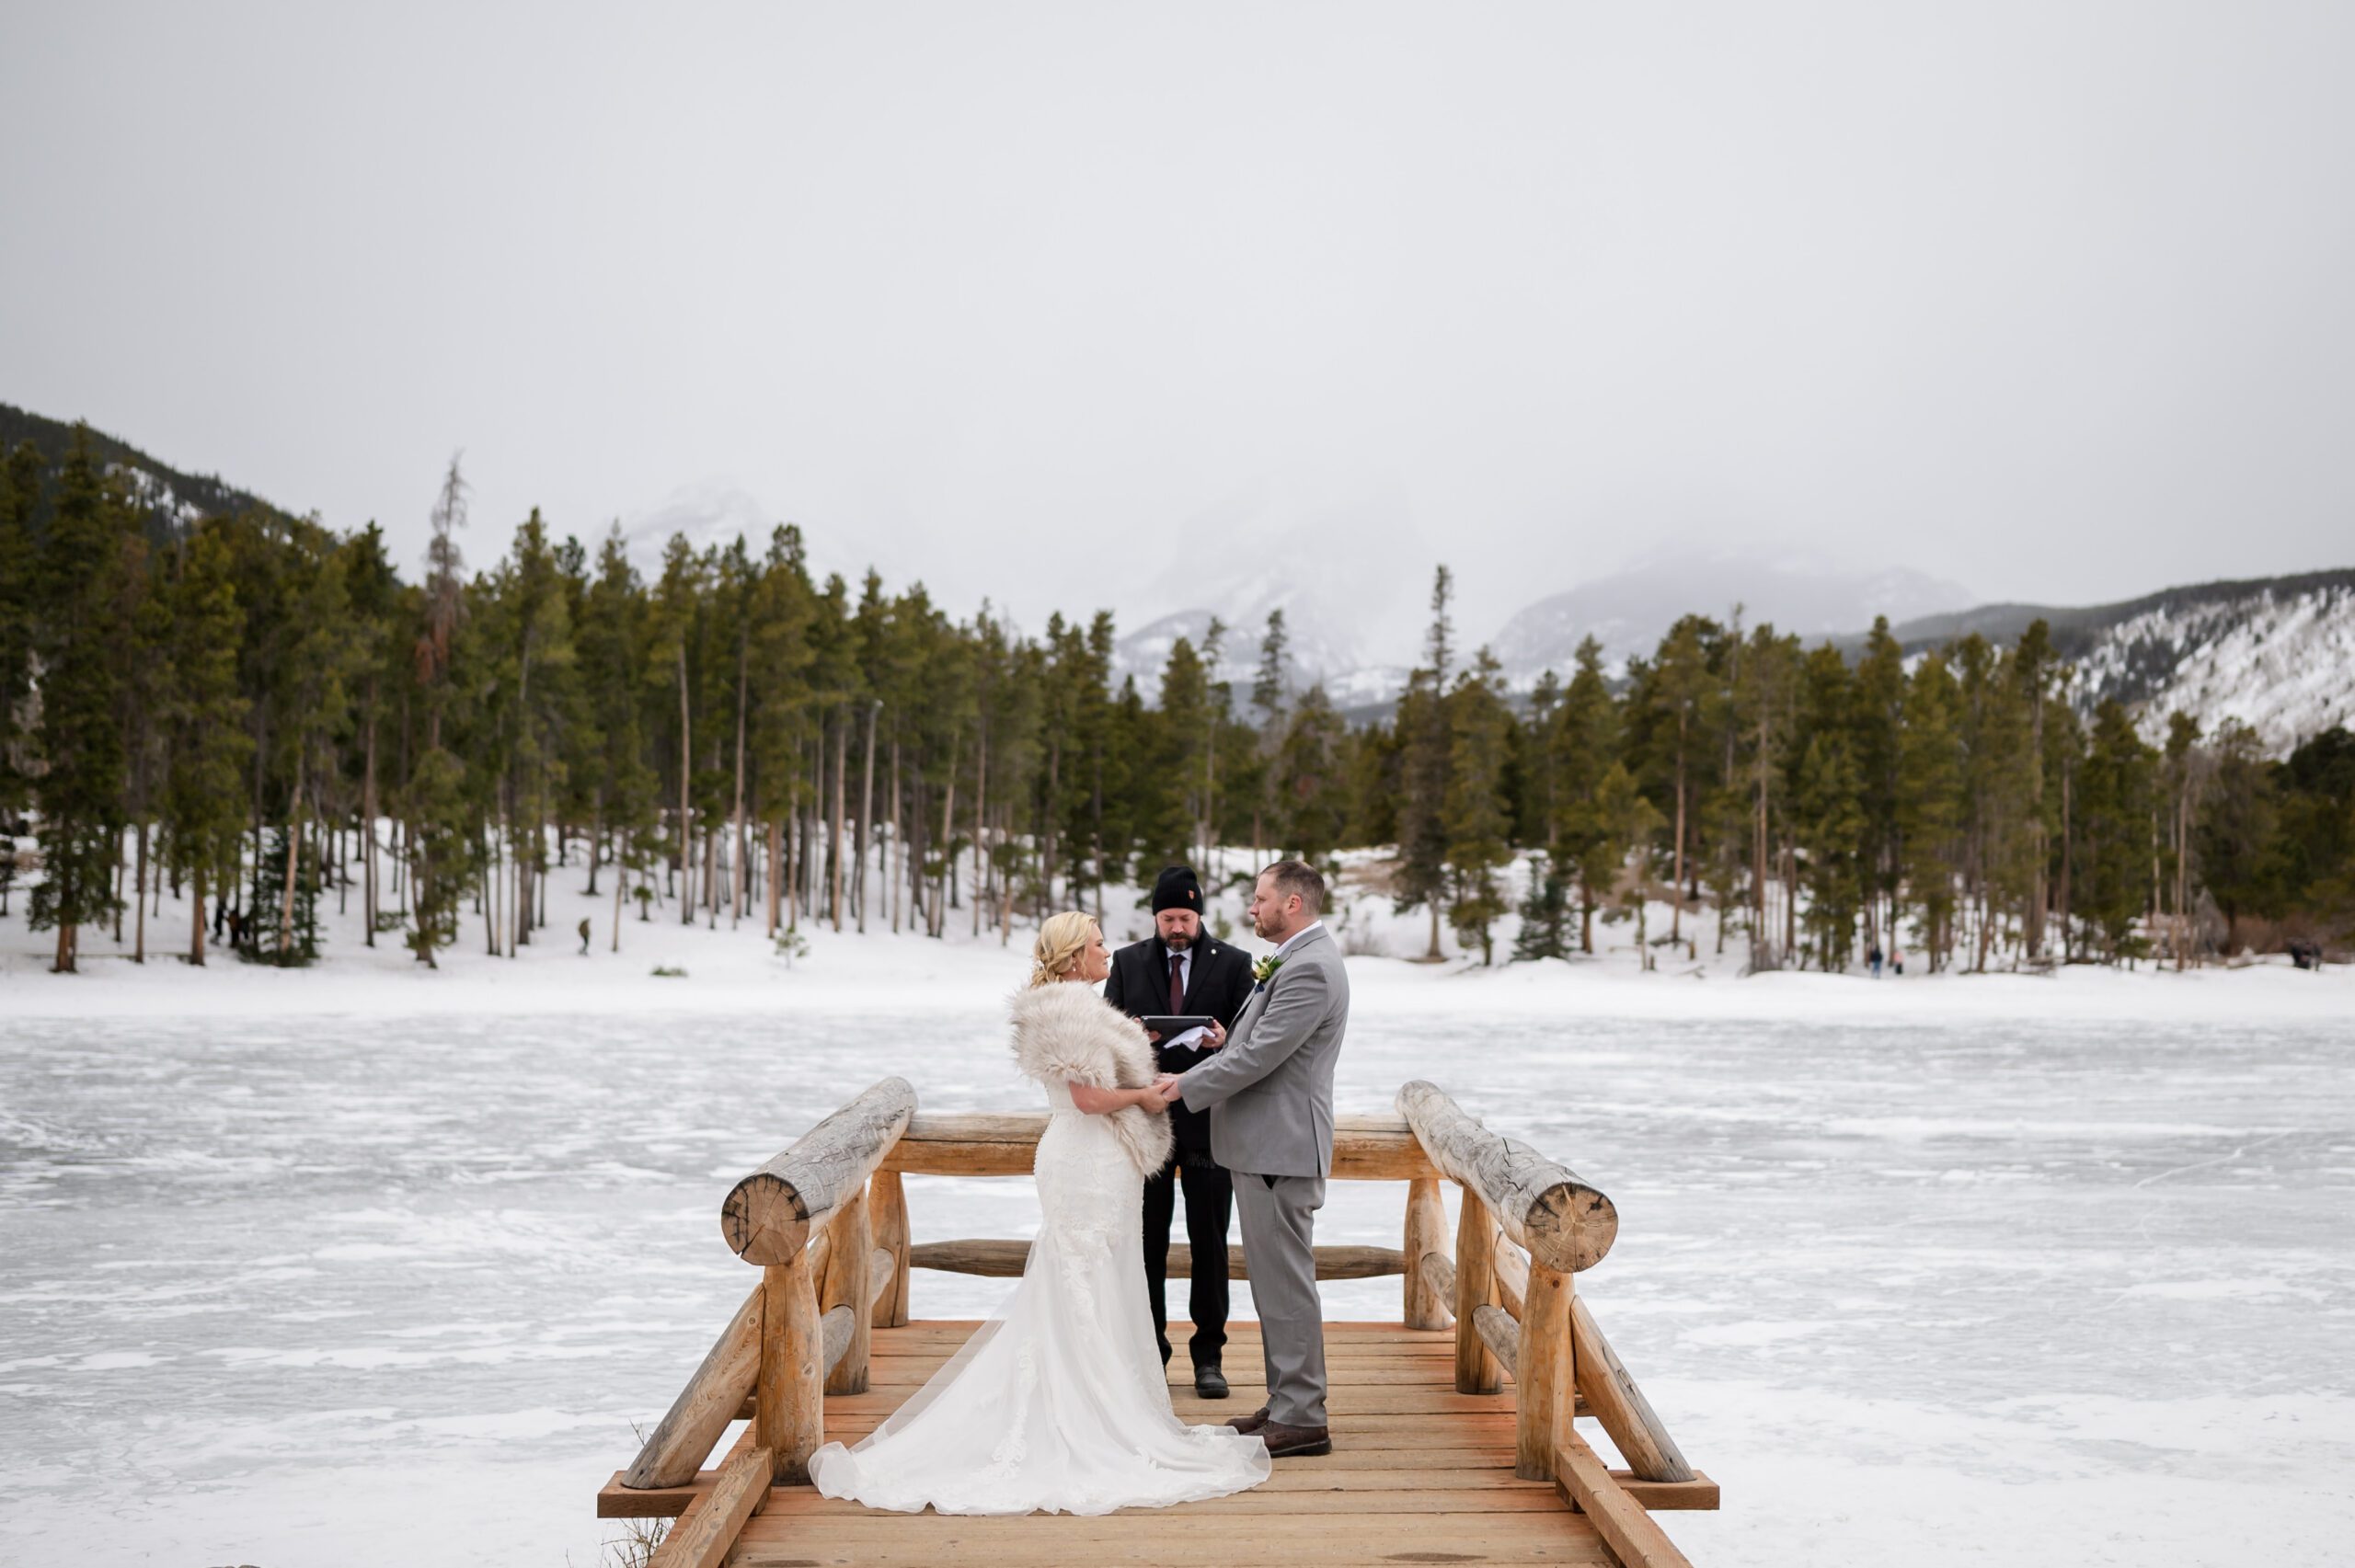 The bride and groom on the bride at their Winter Elopement at Sprague Lake. 